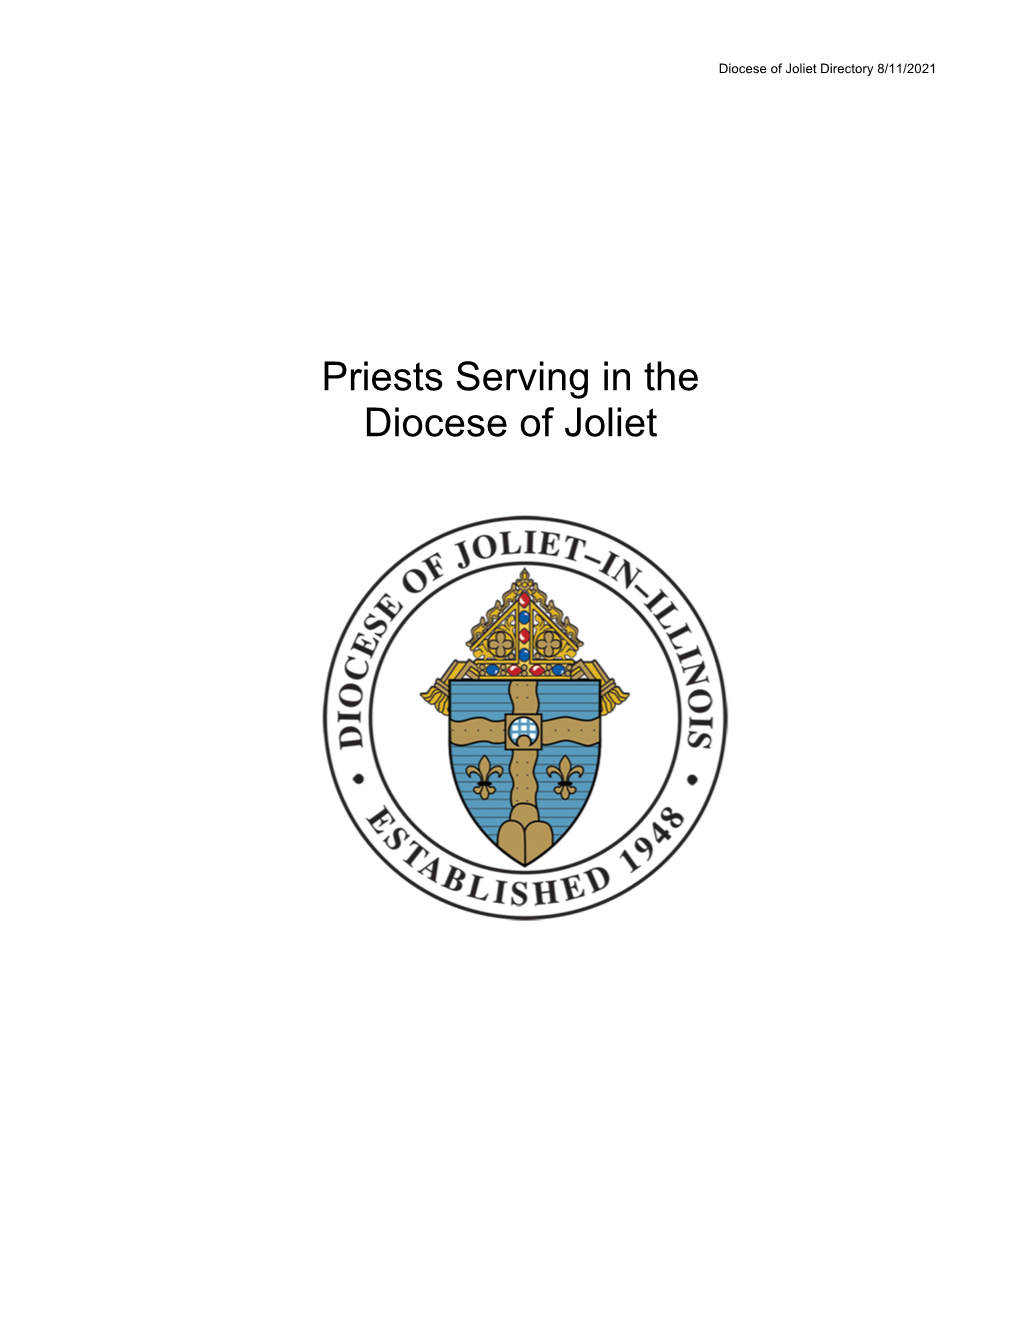 Priests Serving in the Diocese of Joliet